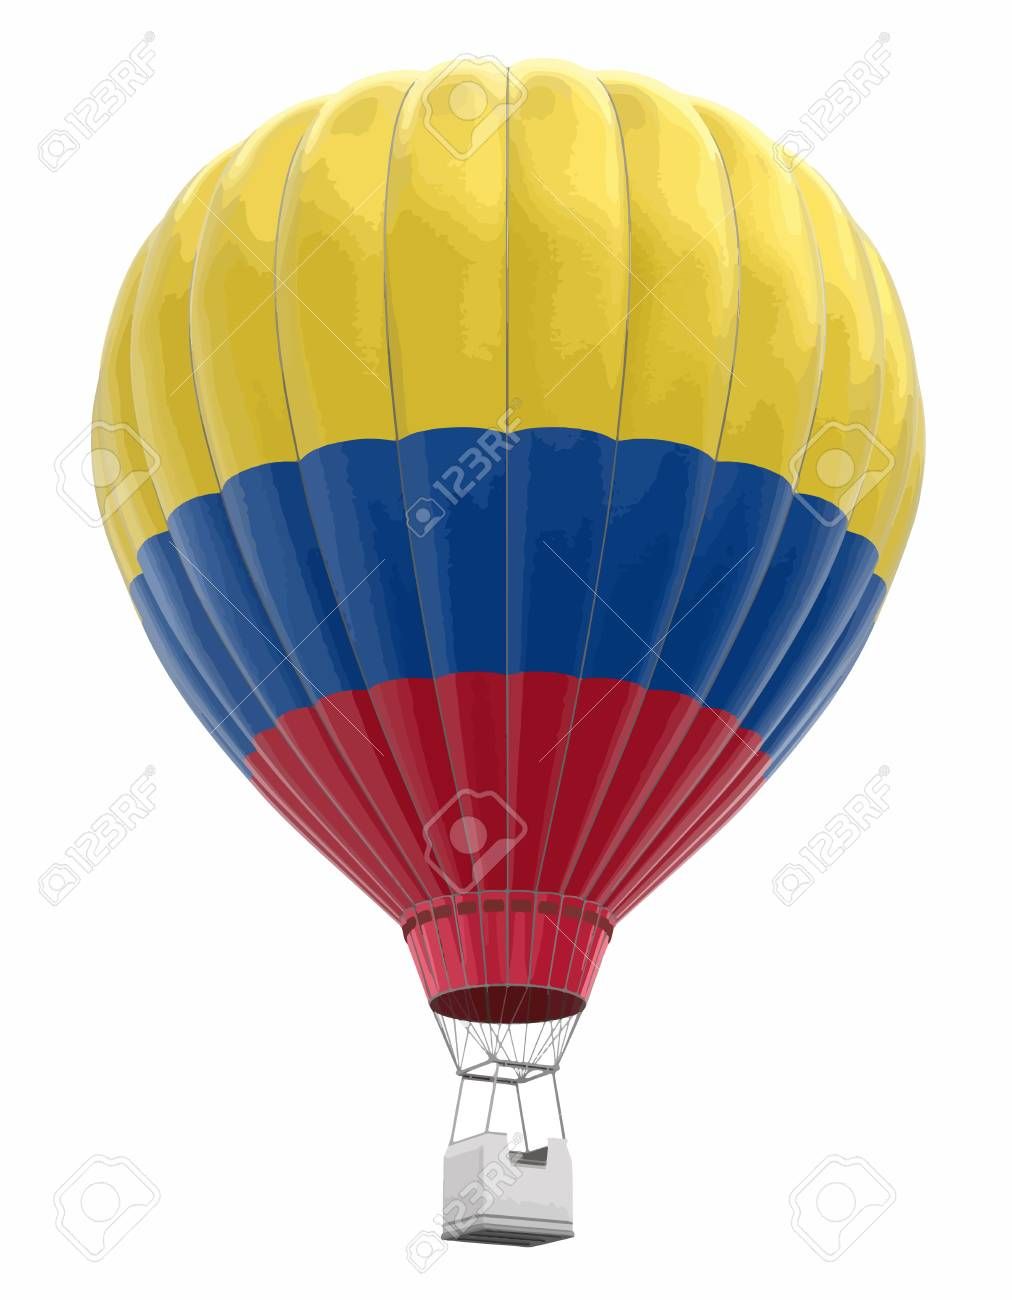 98629650-hot-air-balloon-with-colombian-flag-image-with-clipping-path.jpg